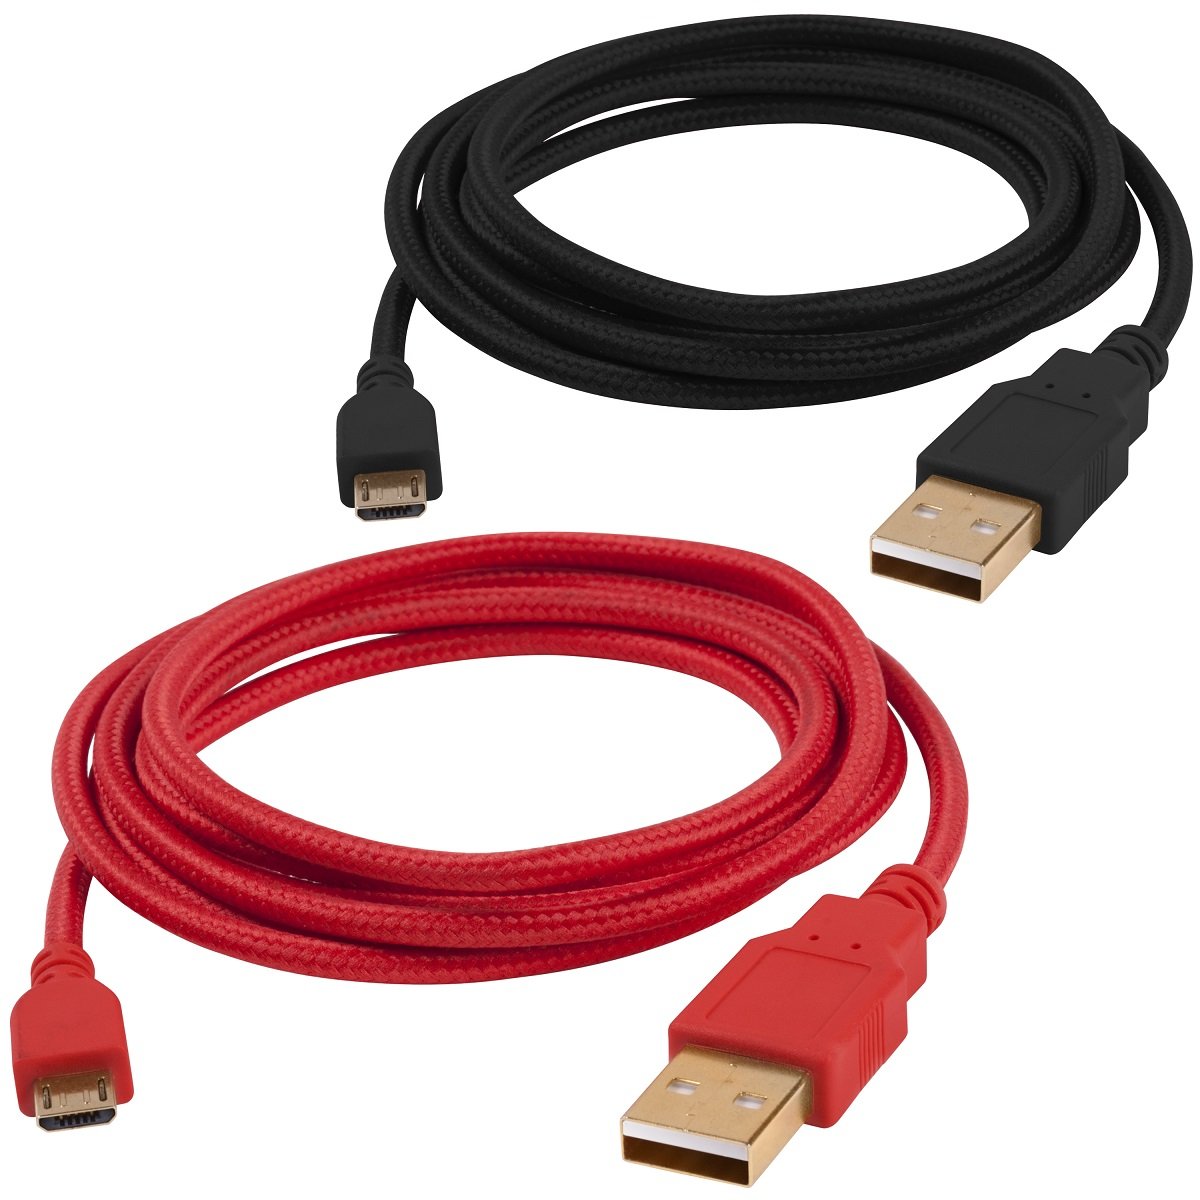 Cable Isound Doble Pack Micro-Usb 6773 Bl/negro